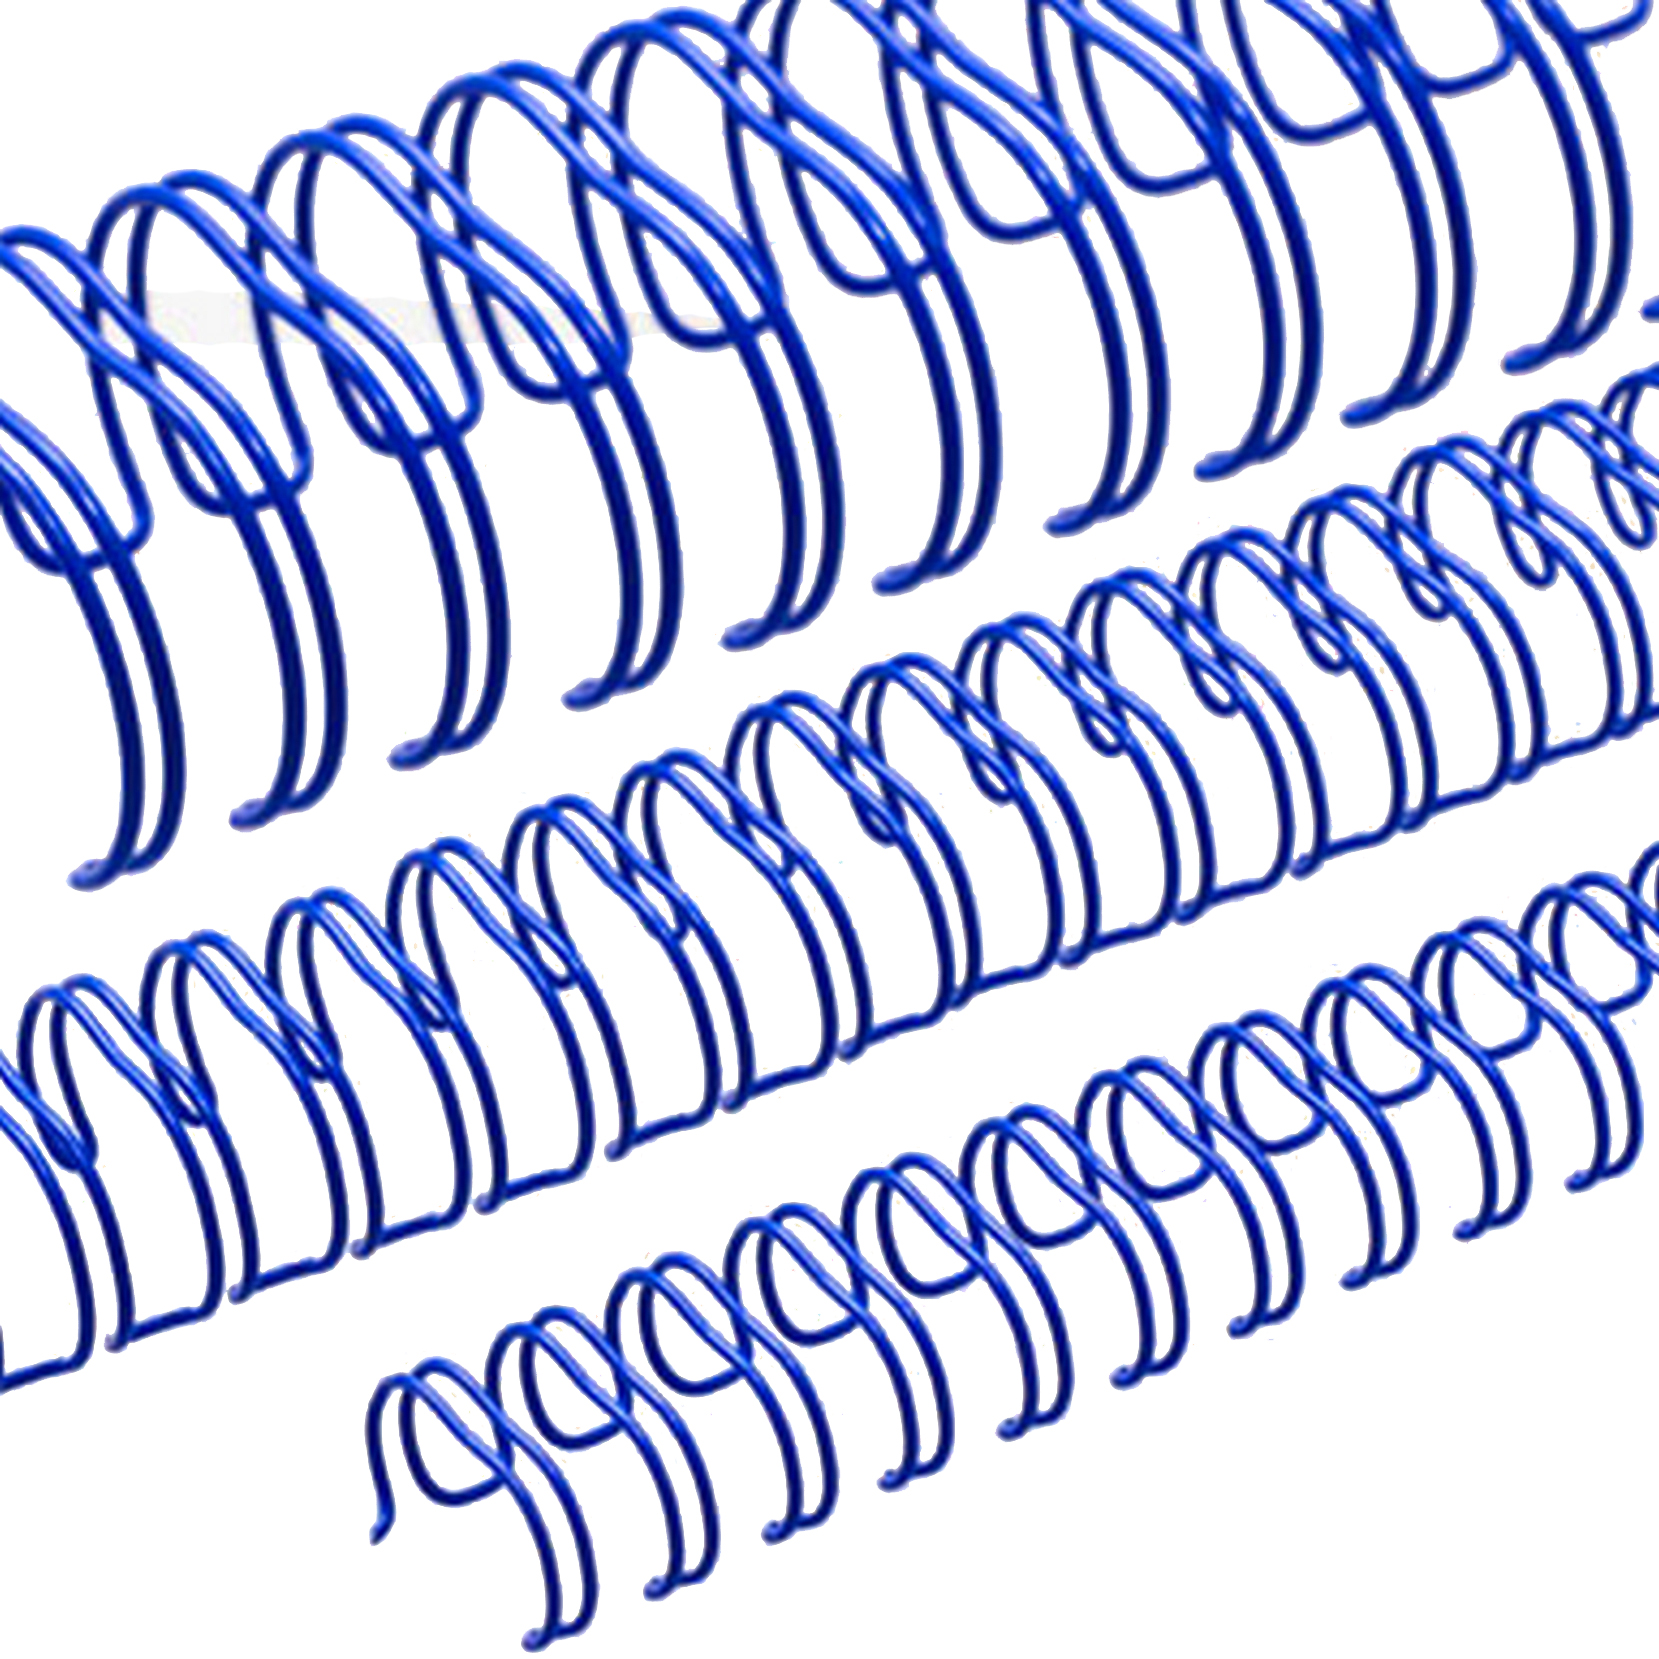 Wire comb bindings - 2:1 pitch - Diameter (in mm) 6.9 (1/4") - Colour blue - to be processed in wire-comb binding machines...